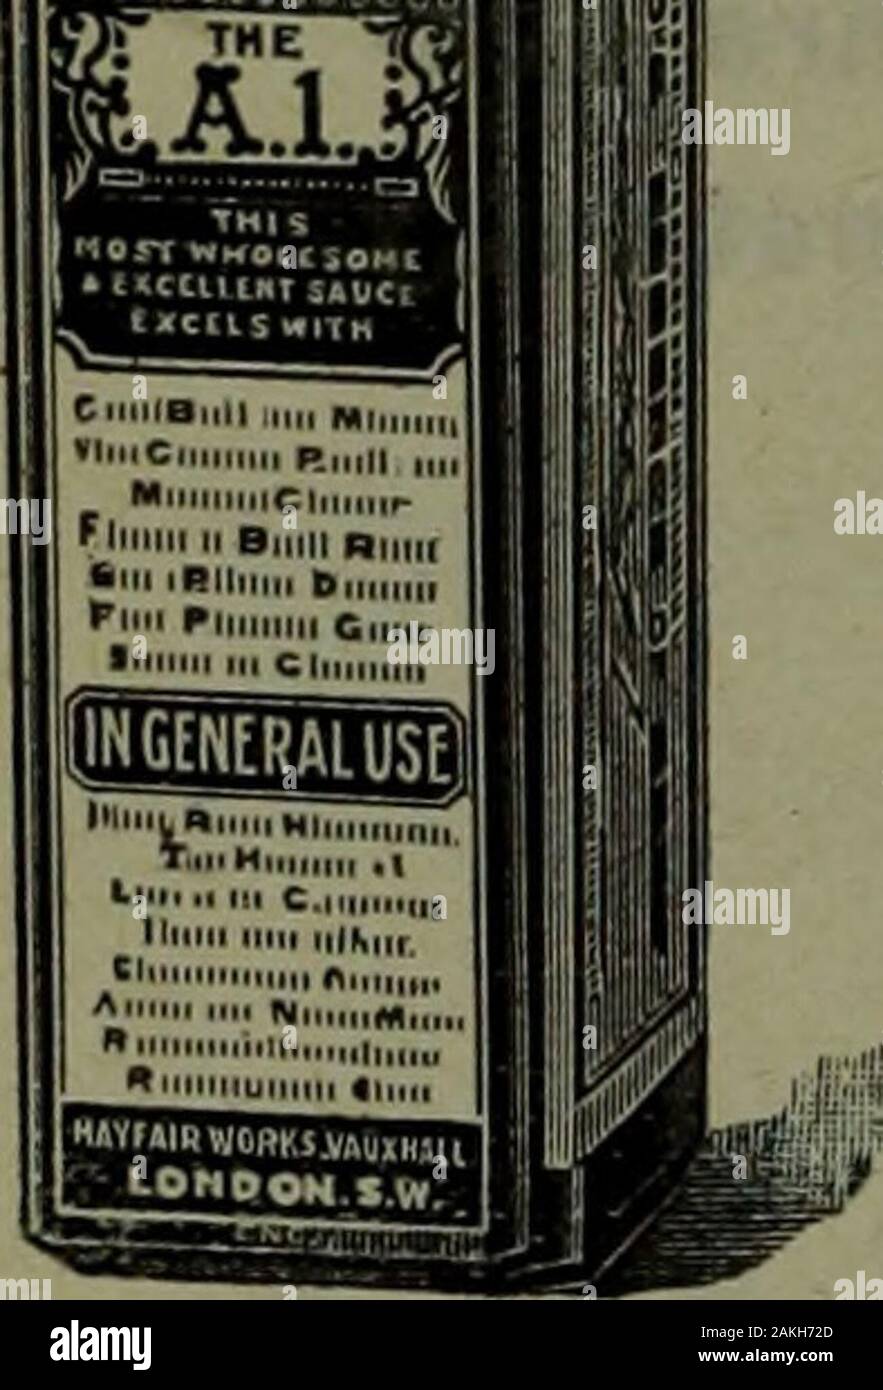 https://c8.alamy.com/comp/2AKH72D/canadian-grocer-july-december-1908-kit-is-an-up-to-date-ex-tract-entirely-free-from-thebitterness-so-objectionablein-ordinary-essences-by-sheer-force-of-meritit-has-achieved-a-remark-able-success-in-the-homemarket-rnd-mcchnts-inthe-dominion-introducingkit-to-their-customersare-laying-the-foundation-ofsatisfactory-repeat-business-agents-la-the-dominioiimodlrel-cilrmithcwaons-sons-202-mcoill-st-oar-bec-city-albert-h-dunn-67si-pelerslonlario-ae-bowron-18-iiai-williamst-hmilton-winnipeg-mason-i-hick108-prinrm-st-the-canadian-grocer-intthnaiionjl-sauce-the-a-1-sauce-a-2AKH72D.jpg